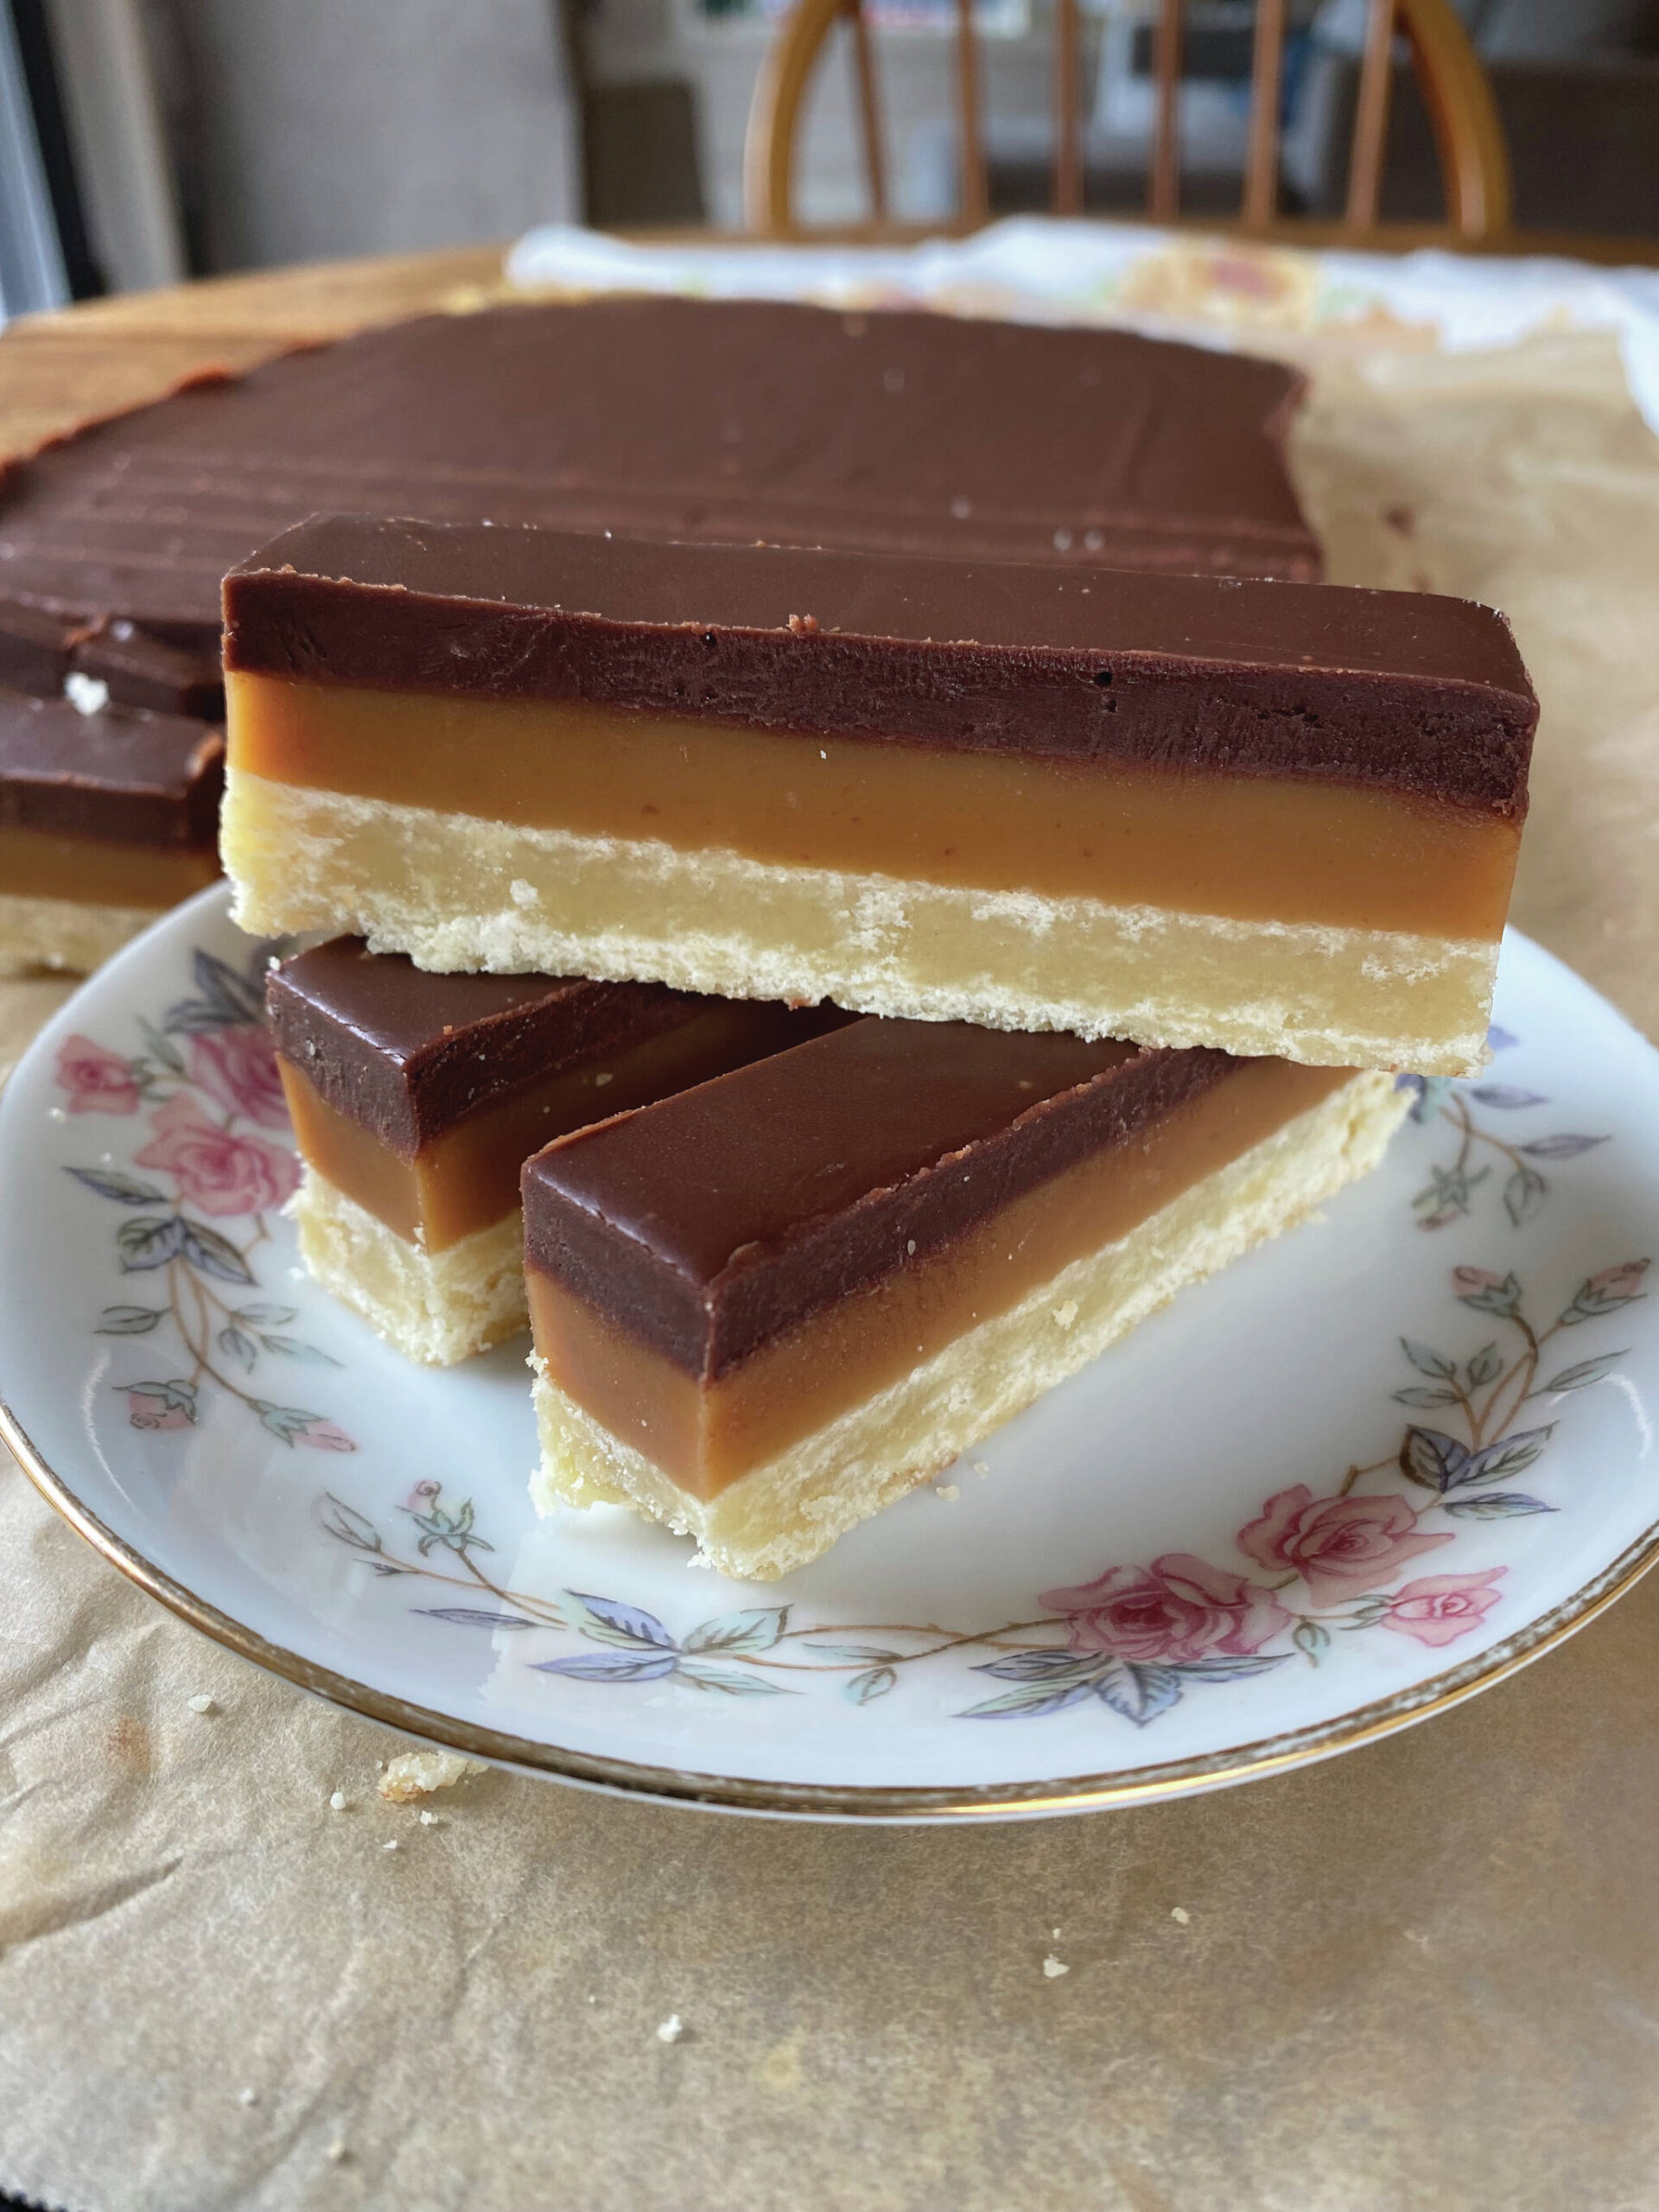 Photo by Tressa Dale/Peninsula Clarion
This homemade bar of shortbread, caramel and chocolate mimics a brandname candy bar for a luxurious at-home treat.